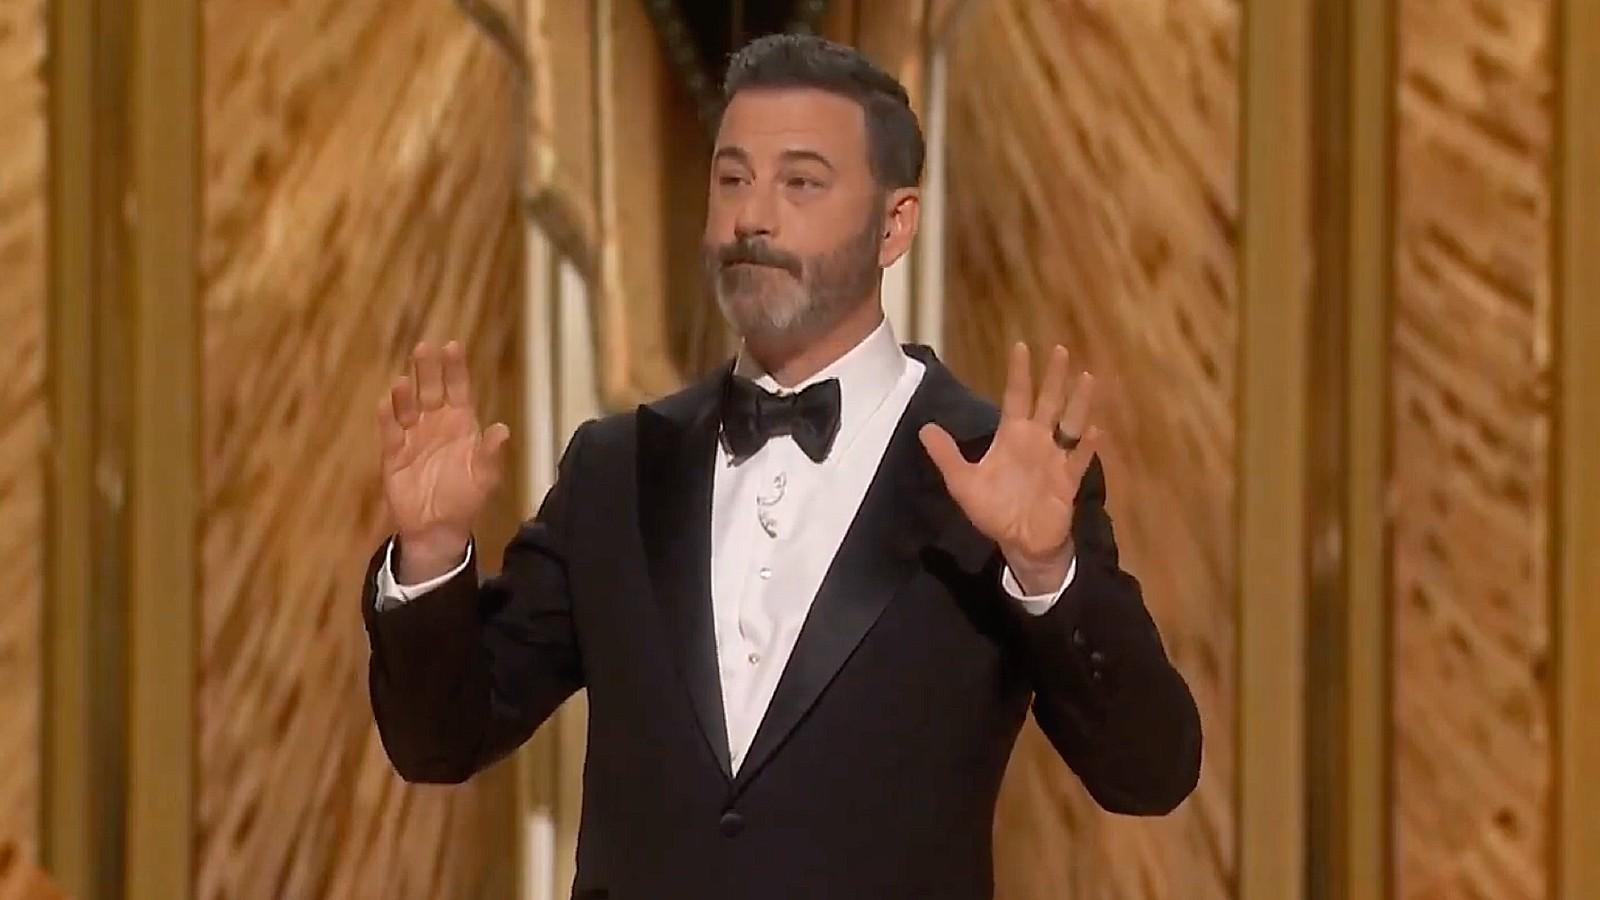 Jimmy Kimmel at this year's Oscars making a joke about Will Smith